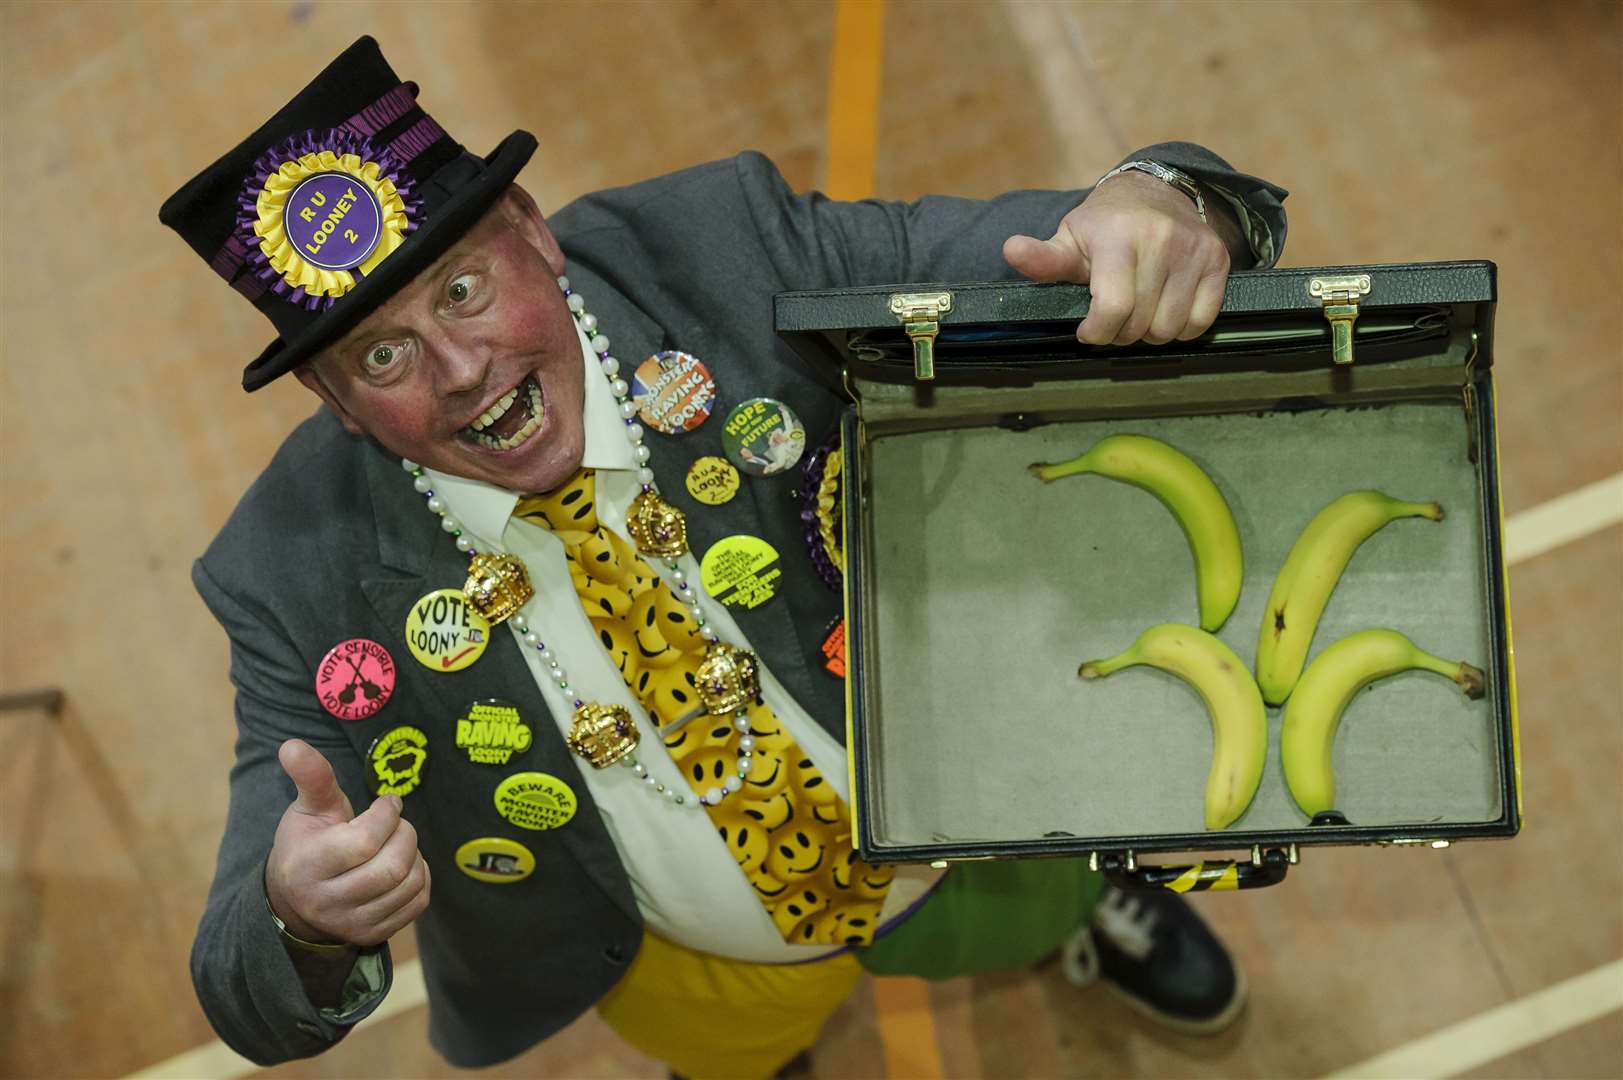 Mad Mike Young with his case of bananas at the Sittingbourne and Sheppey count for the 2017 General Election at the Swallows Leisure Centre, Sittingbourne. Picture: Andy Payton